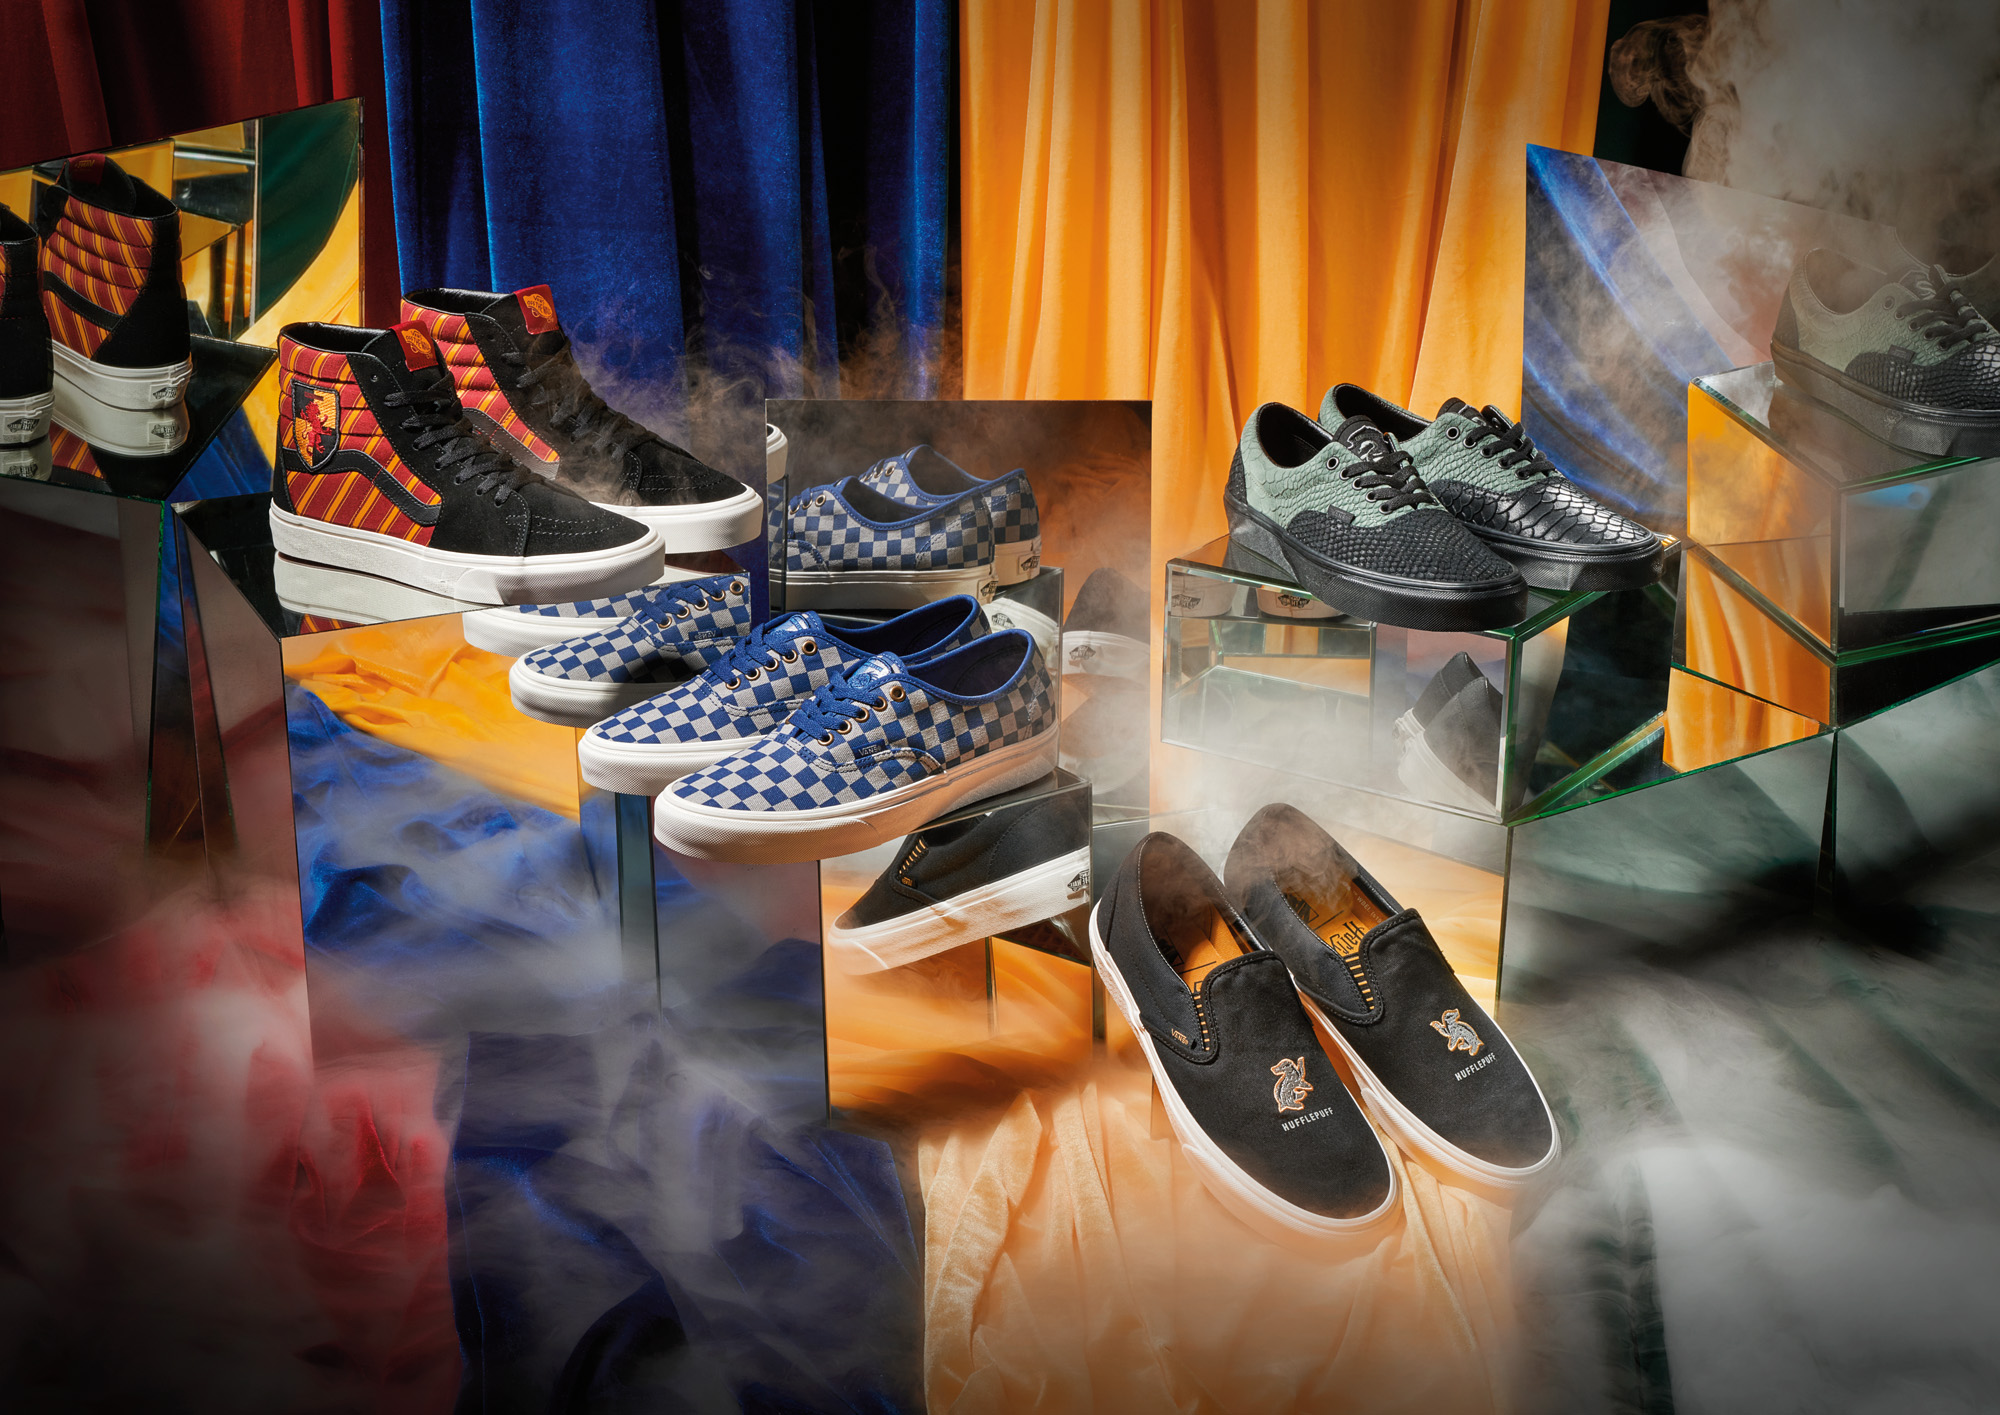 Vans set to Harry Potter inspired collection - Lifestyle - The Jakarta